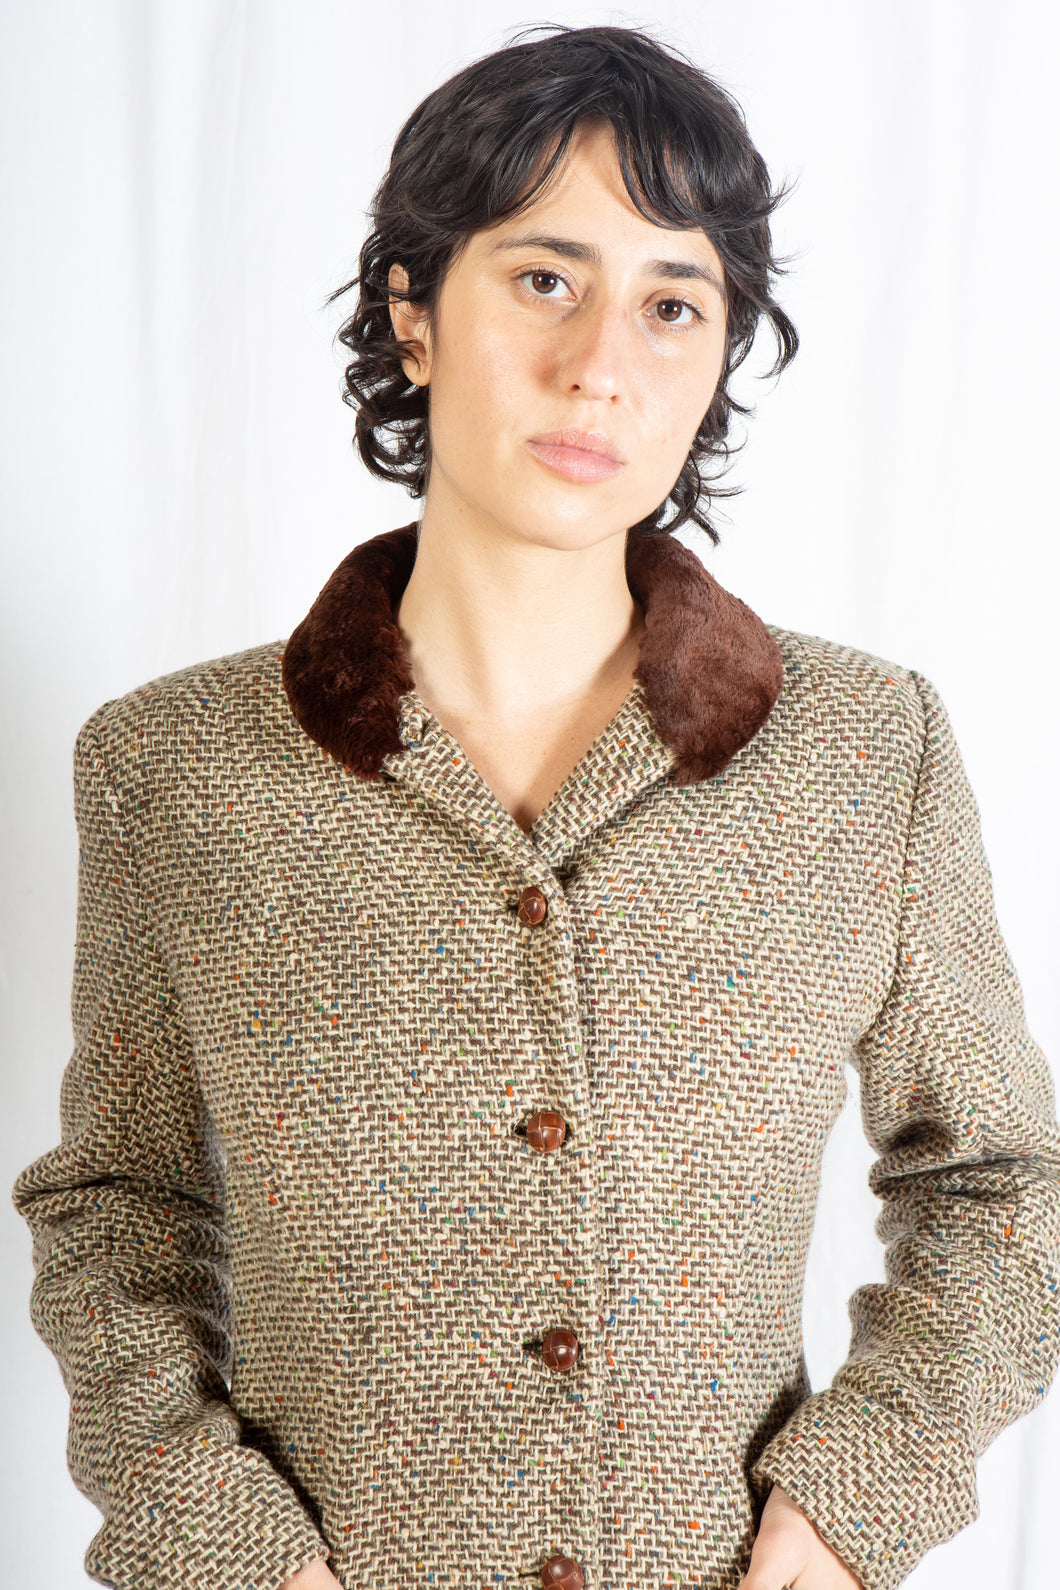 Tailored Tweed Blazer with Fur Trim and Leather Buttons